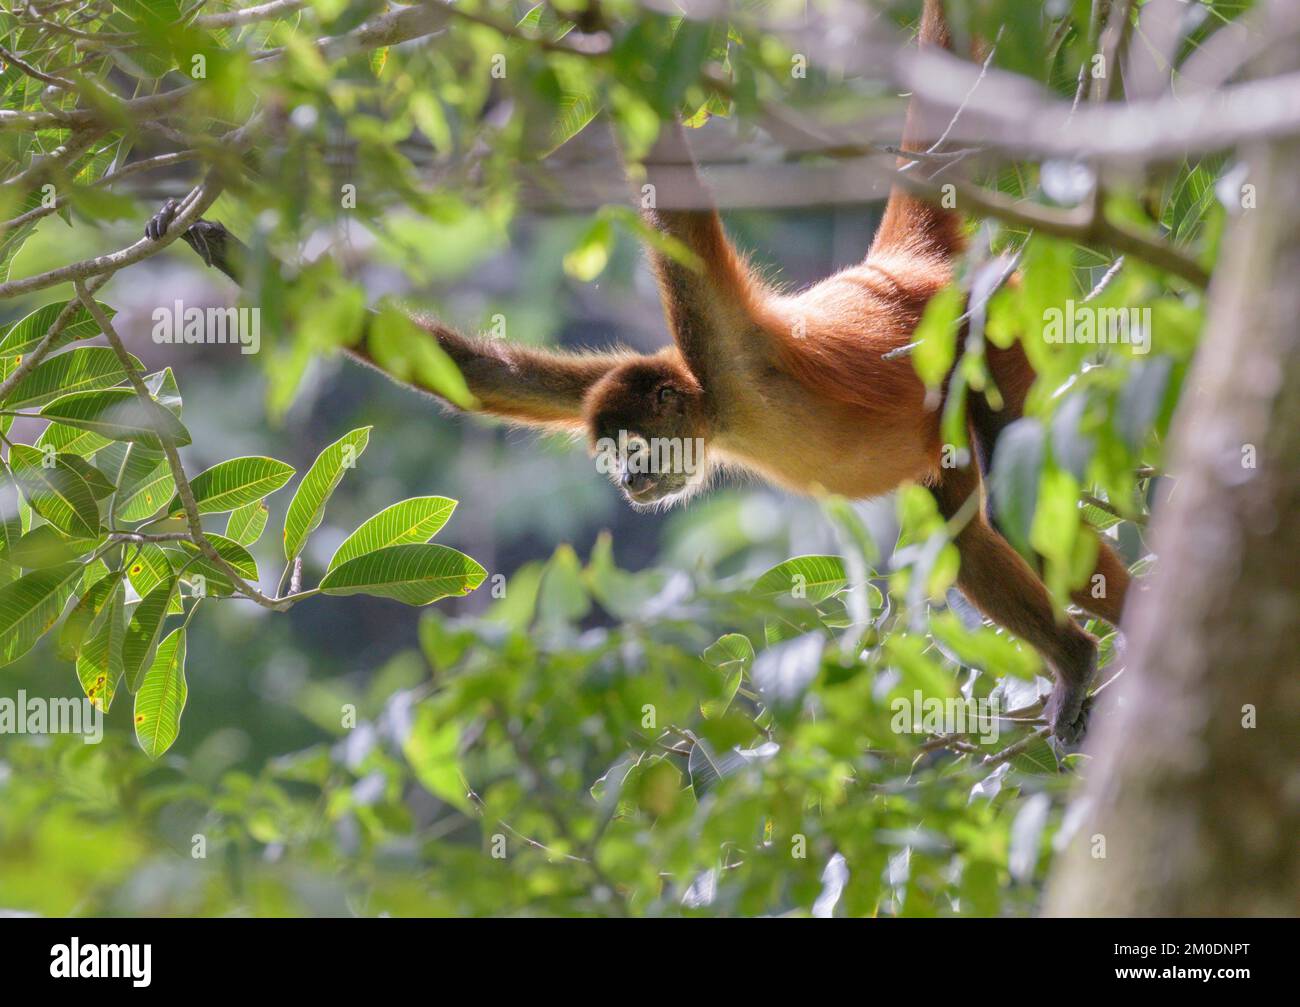 Black-handed or Geoffroy's spider monkey (Ateles geoffroyi) in forest canopy, Osa Peninsula, Puntarenas, Costa Rica. Stock Photo